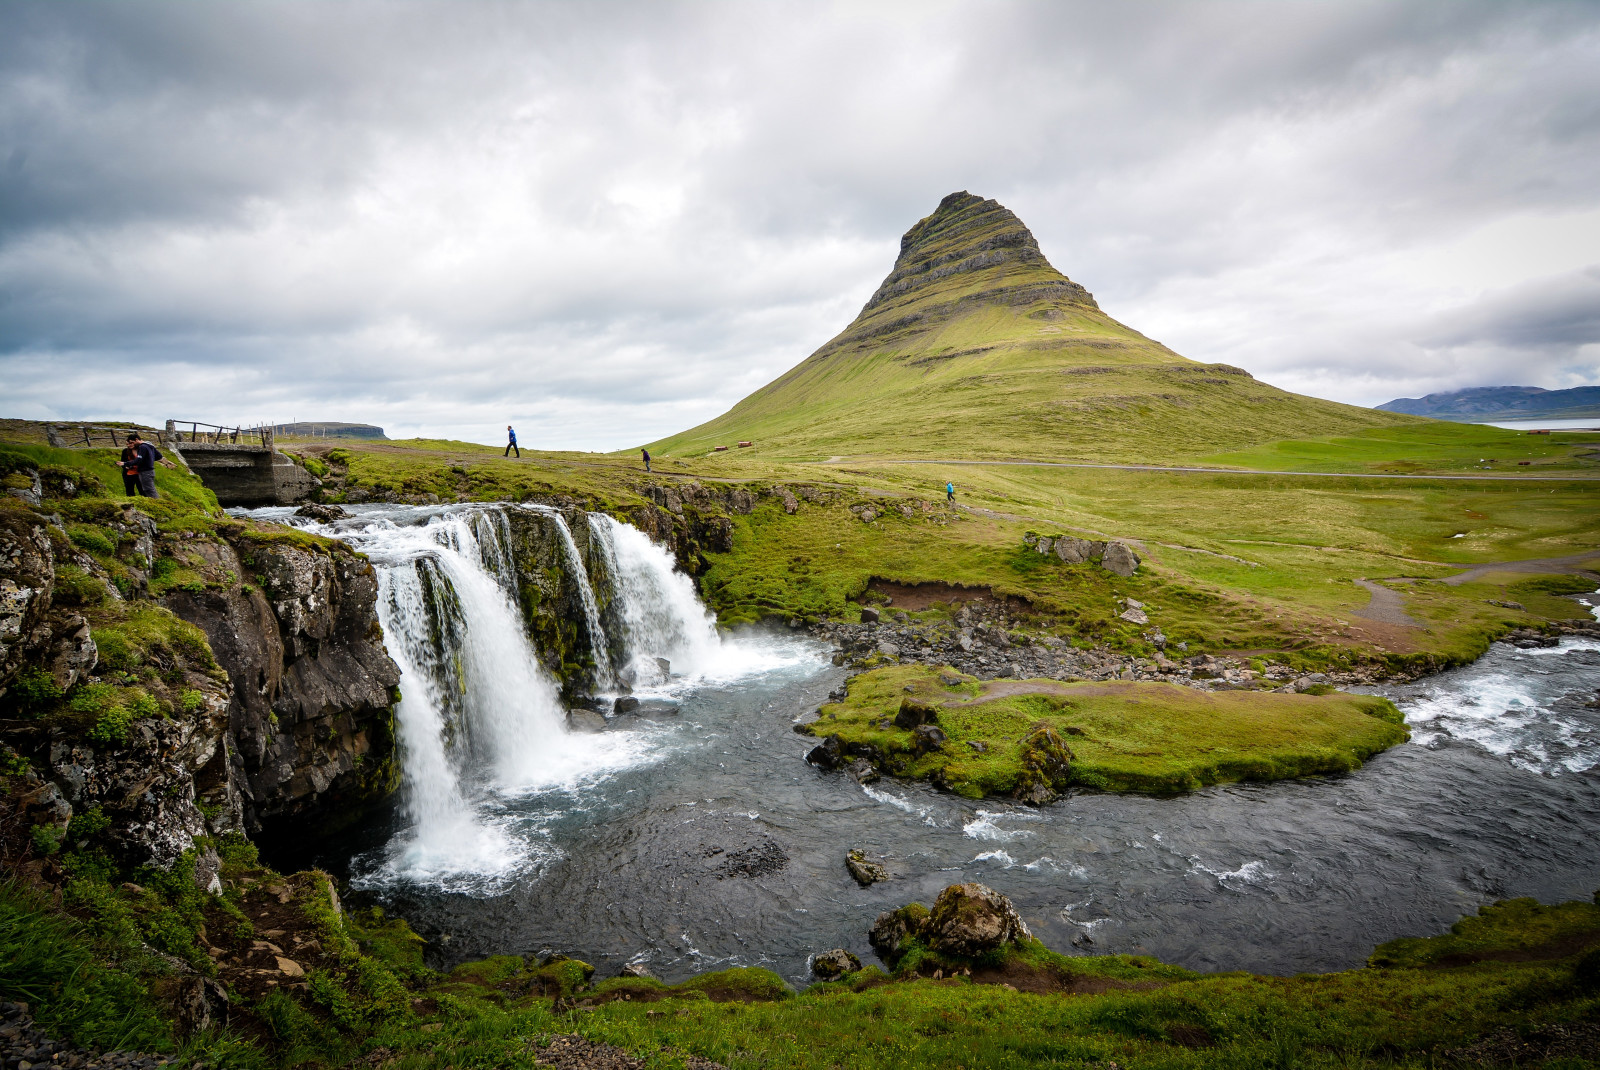 A Beginner’s Guide to Food and Activities in Iceland - Things to do